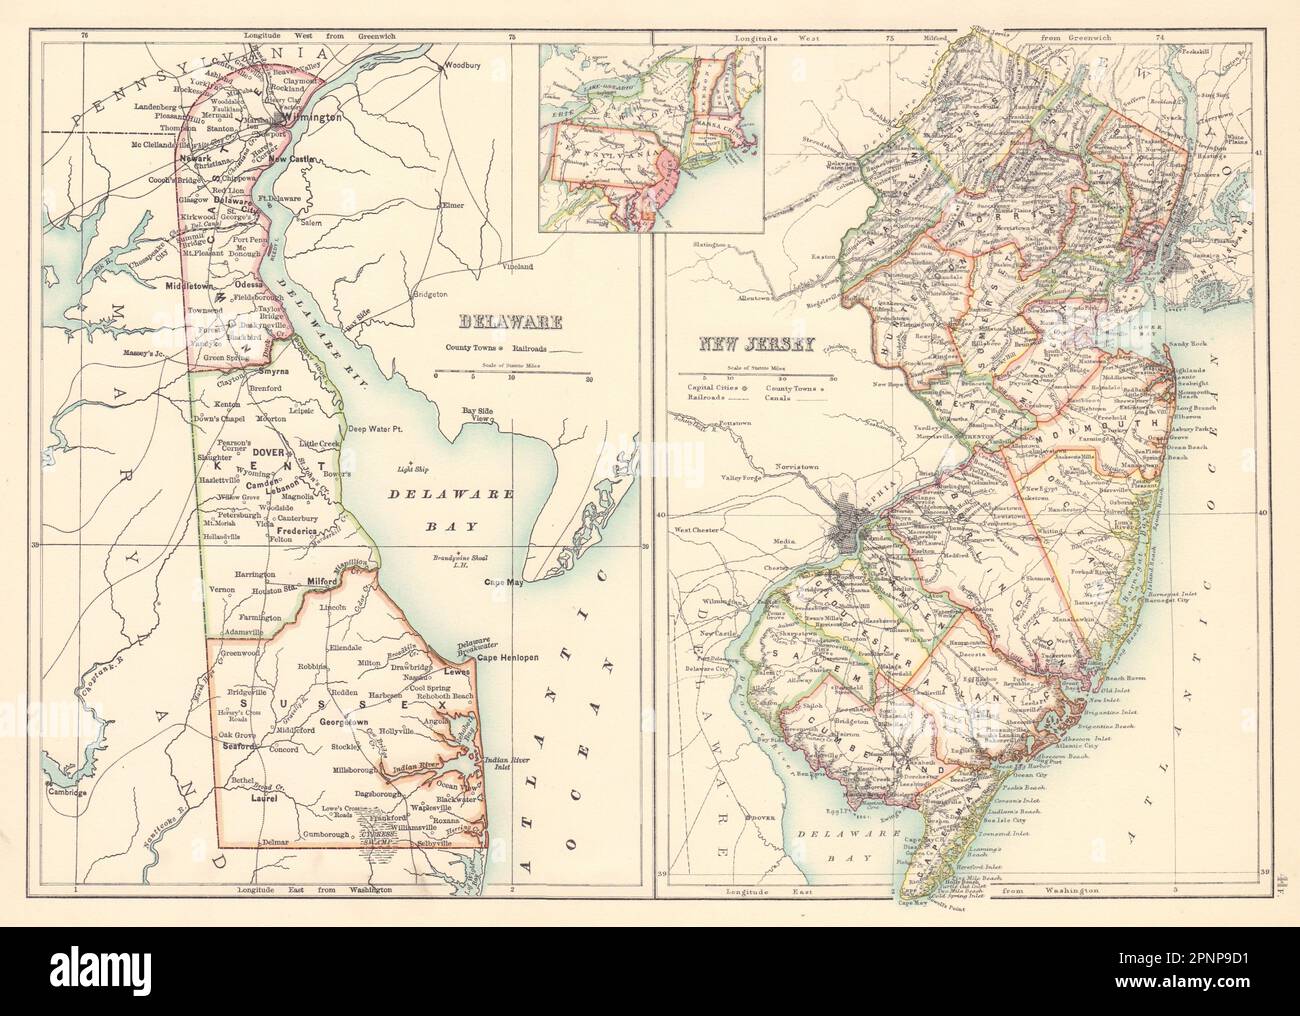 Delaware and New Jersey state maps showing counties. BARTHOLOMEW 1898 old Stock Photo